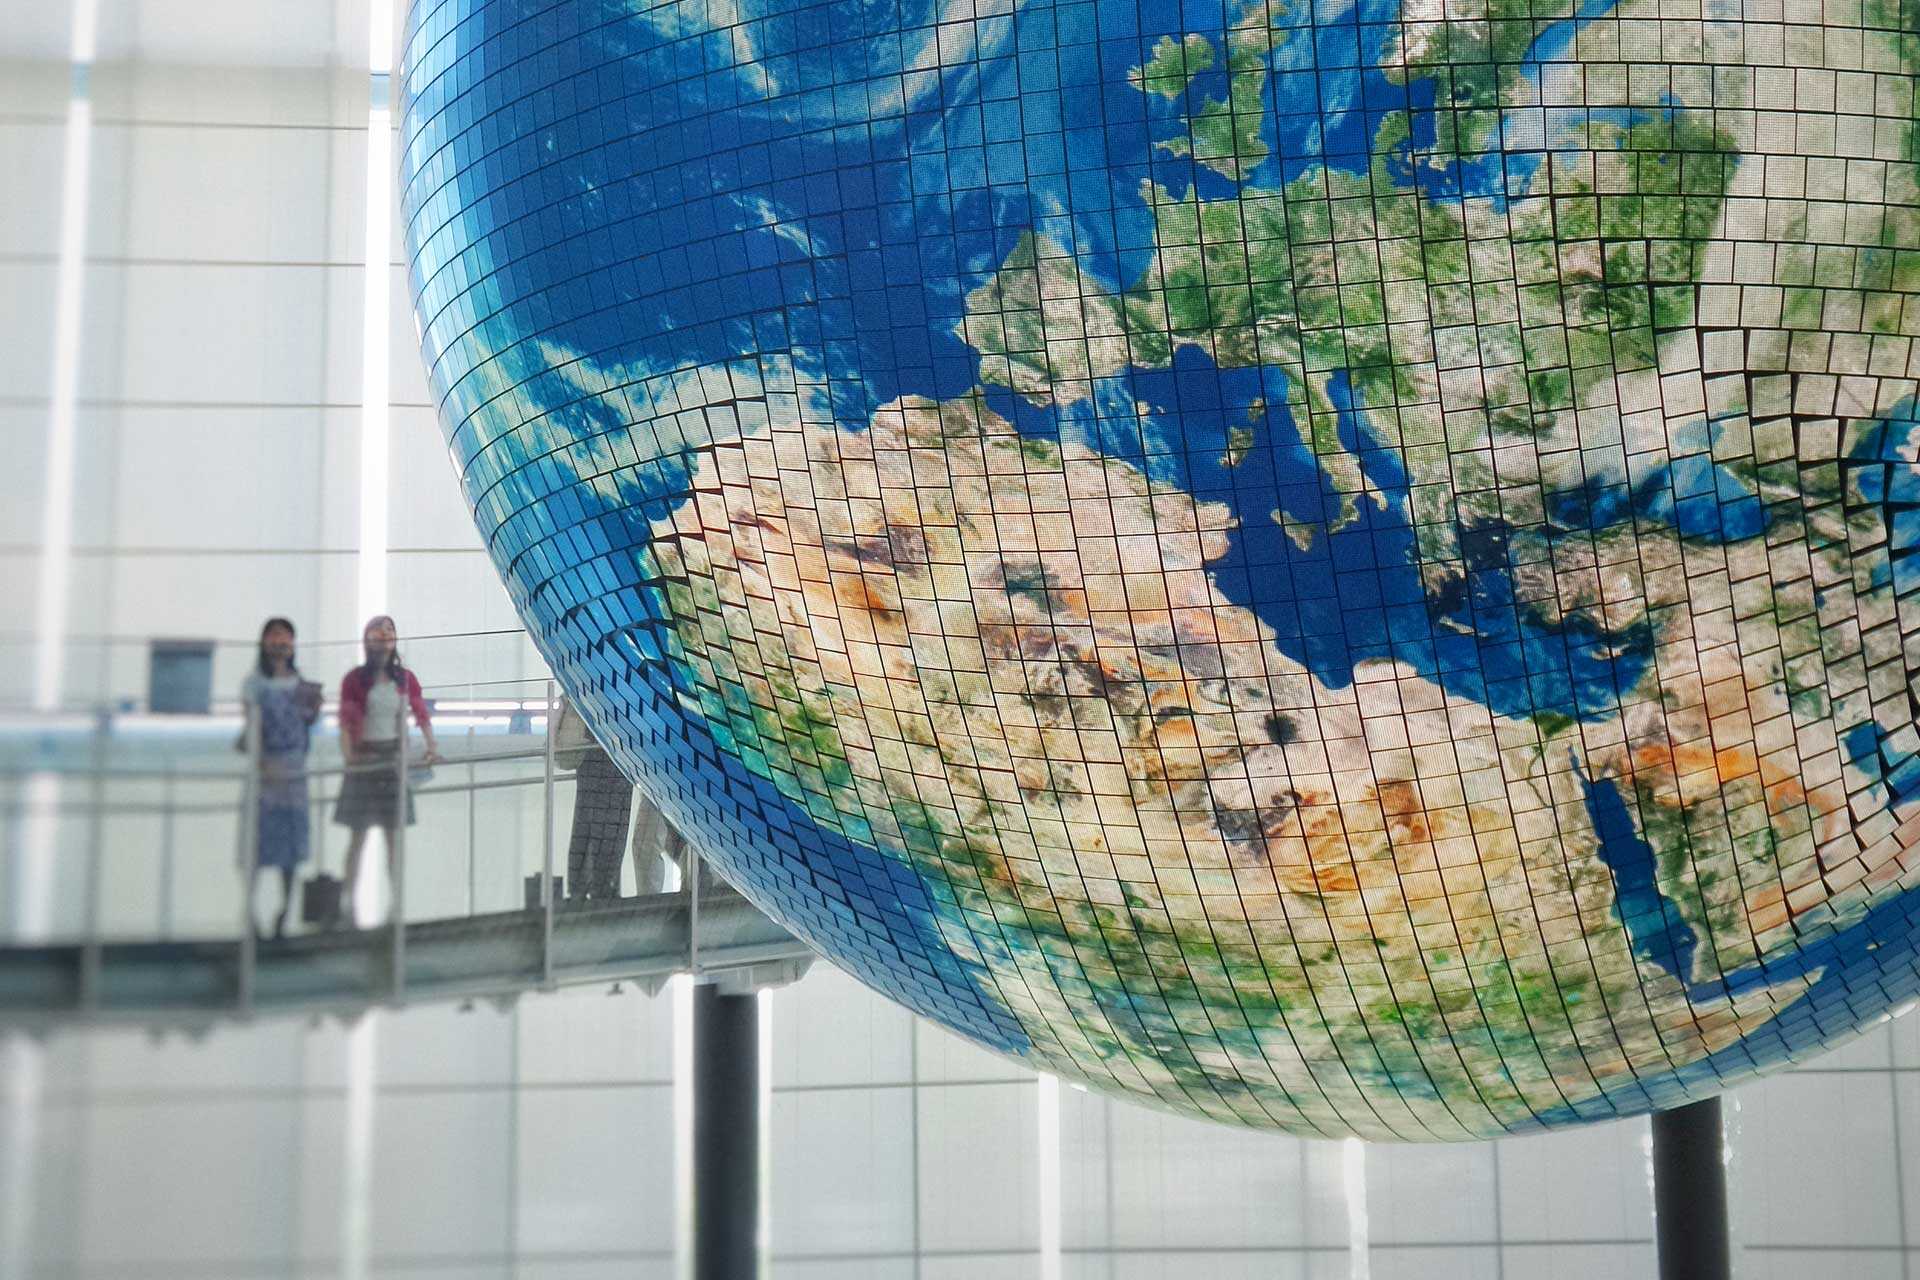 Two people look at a giant mosaic globe